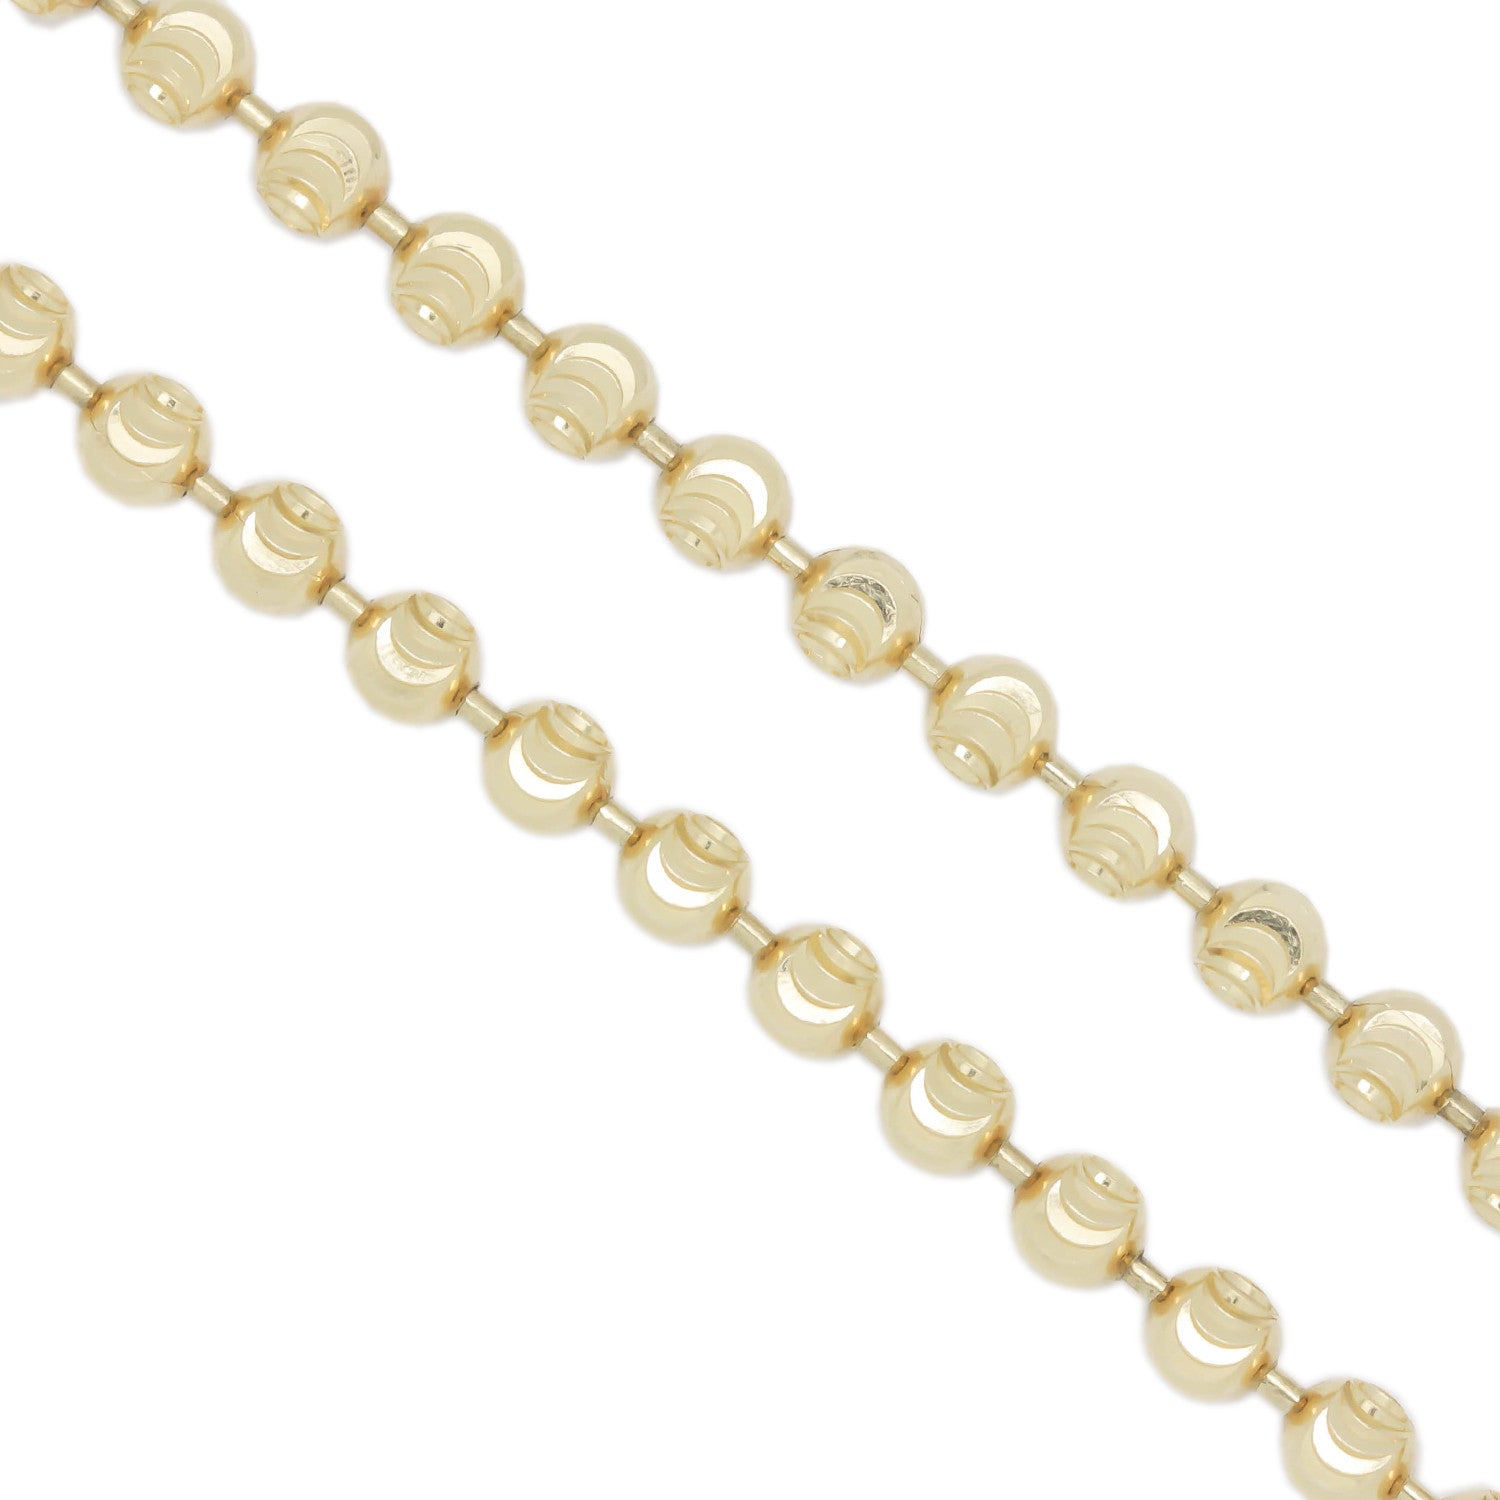 10K Yellow Gold 2.5 mm Figaro Chain Necklace 20 Inches